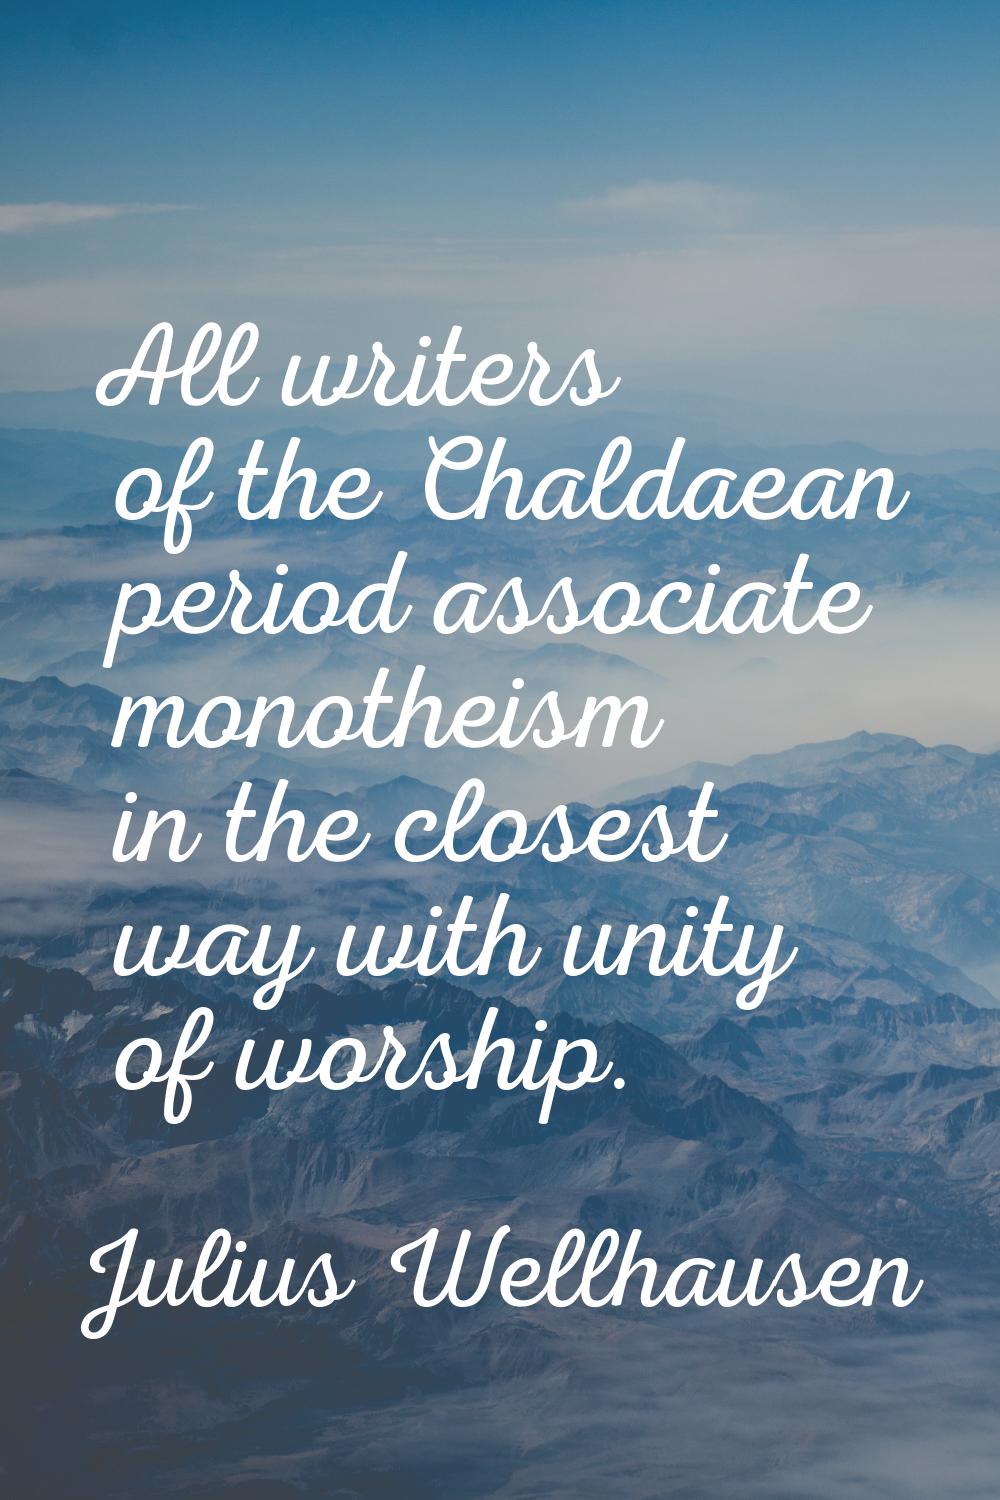 All writers of the Chaldaean period associate monotheism in the closest way with unity of worship.